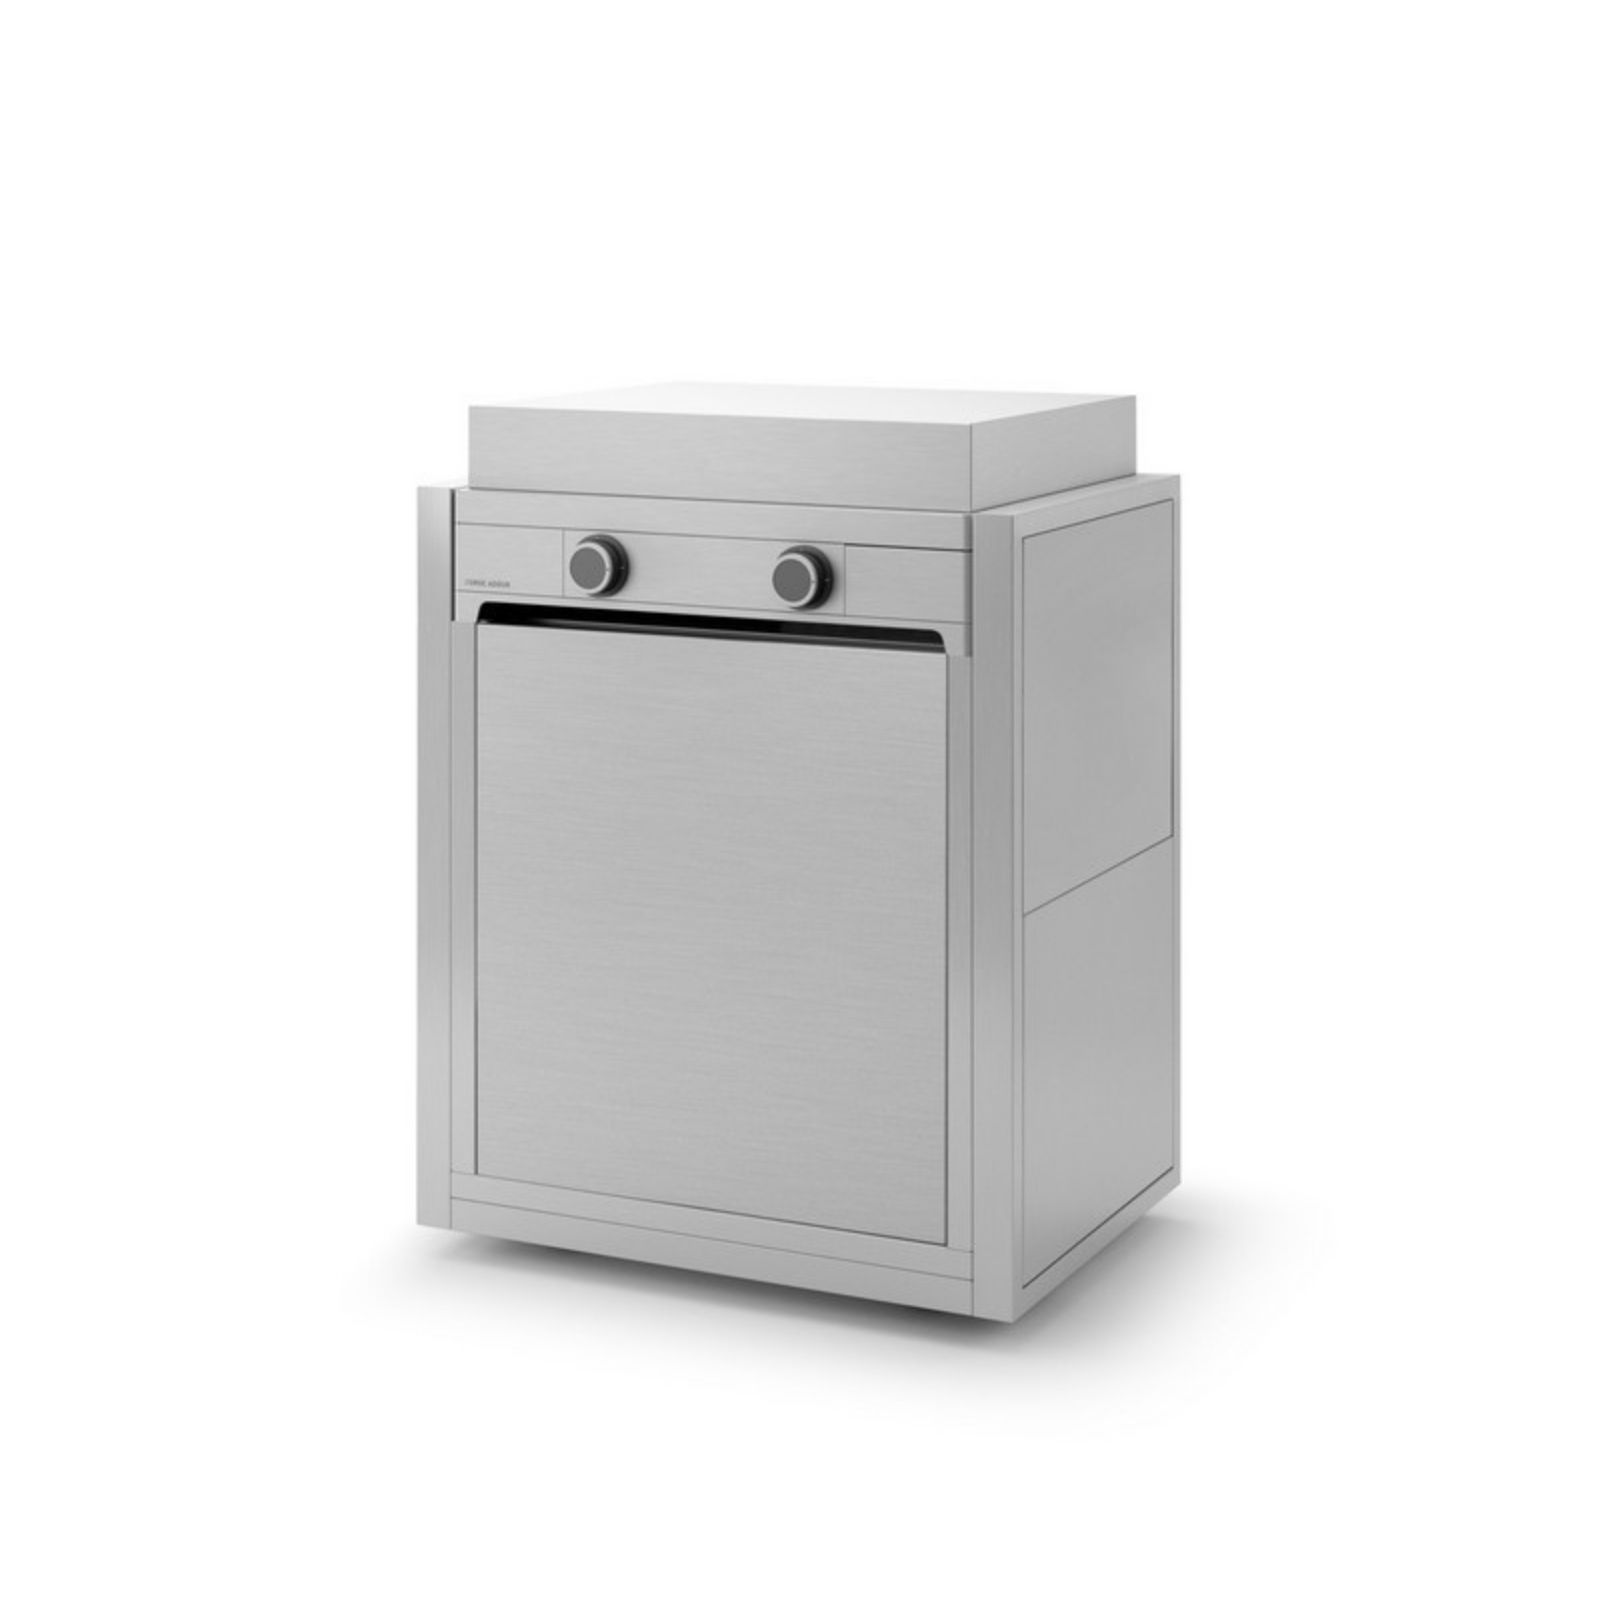 chariot-modern-60-inox-forge-adour-1